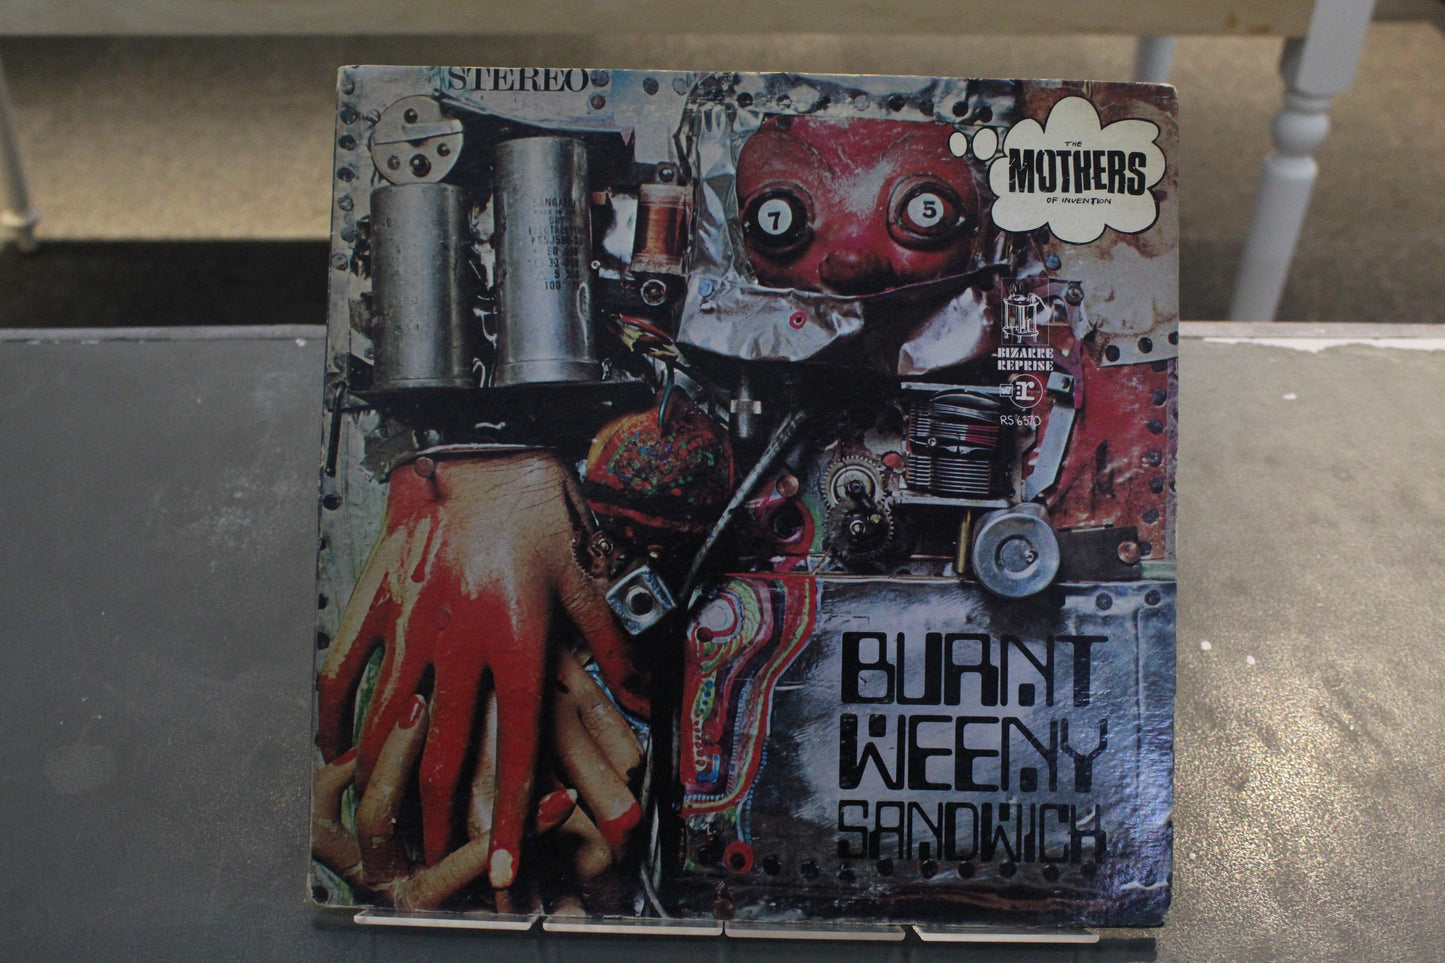 The Mothers of Invention: Burnt Weeny Sandwich album